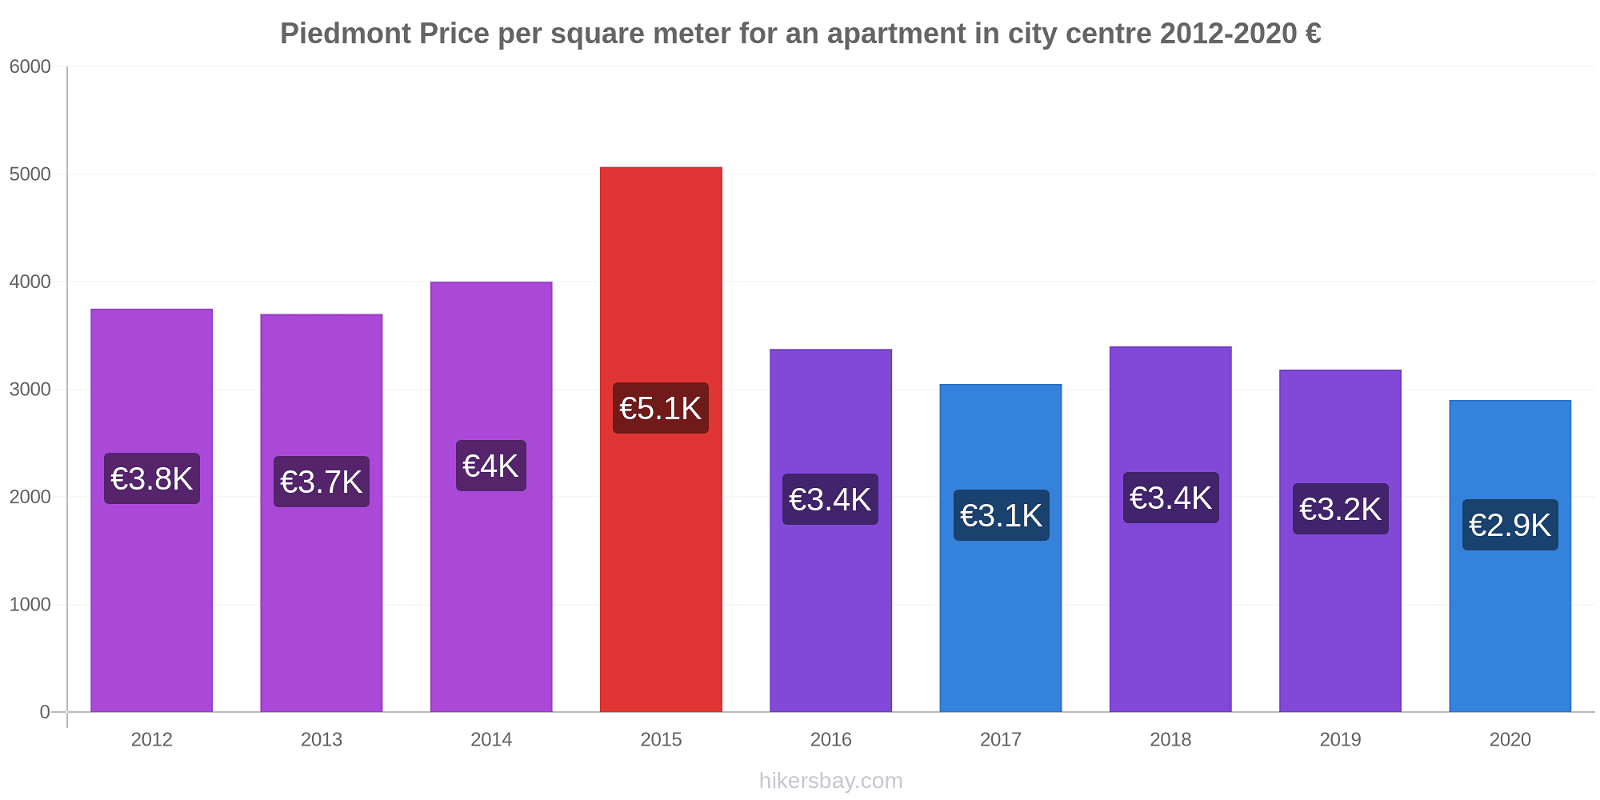 Piedmont price changes Price per square meter for an apartment in city centre hikersbay.com